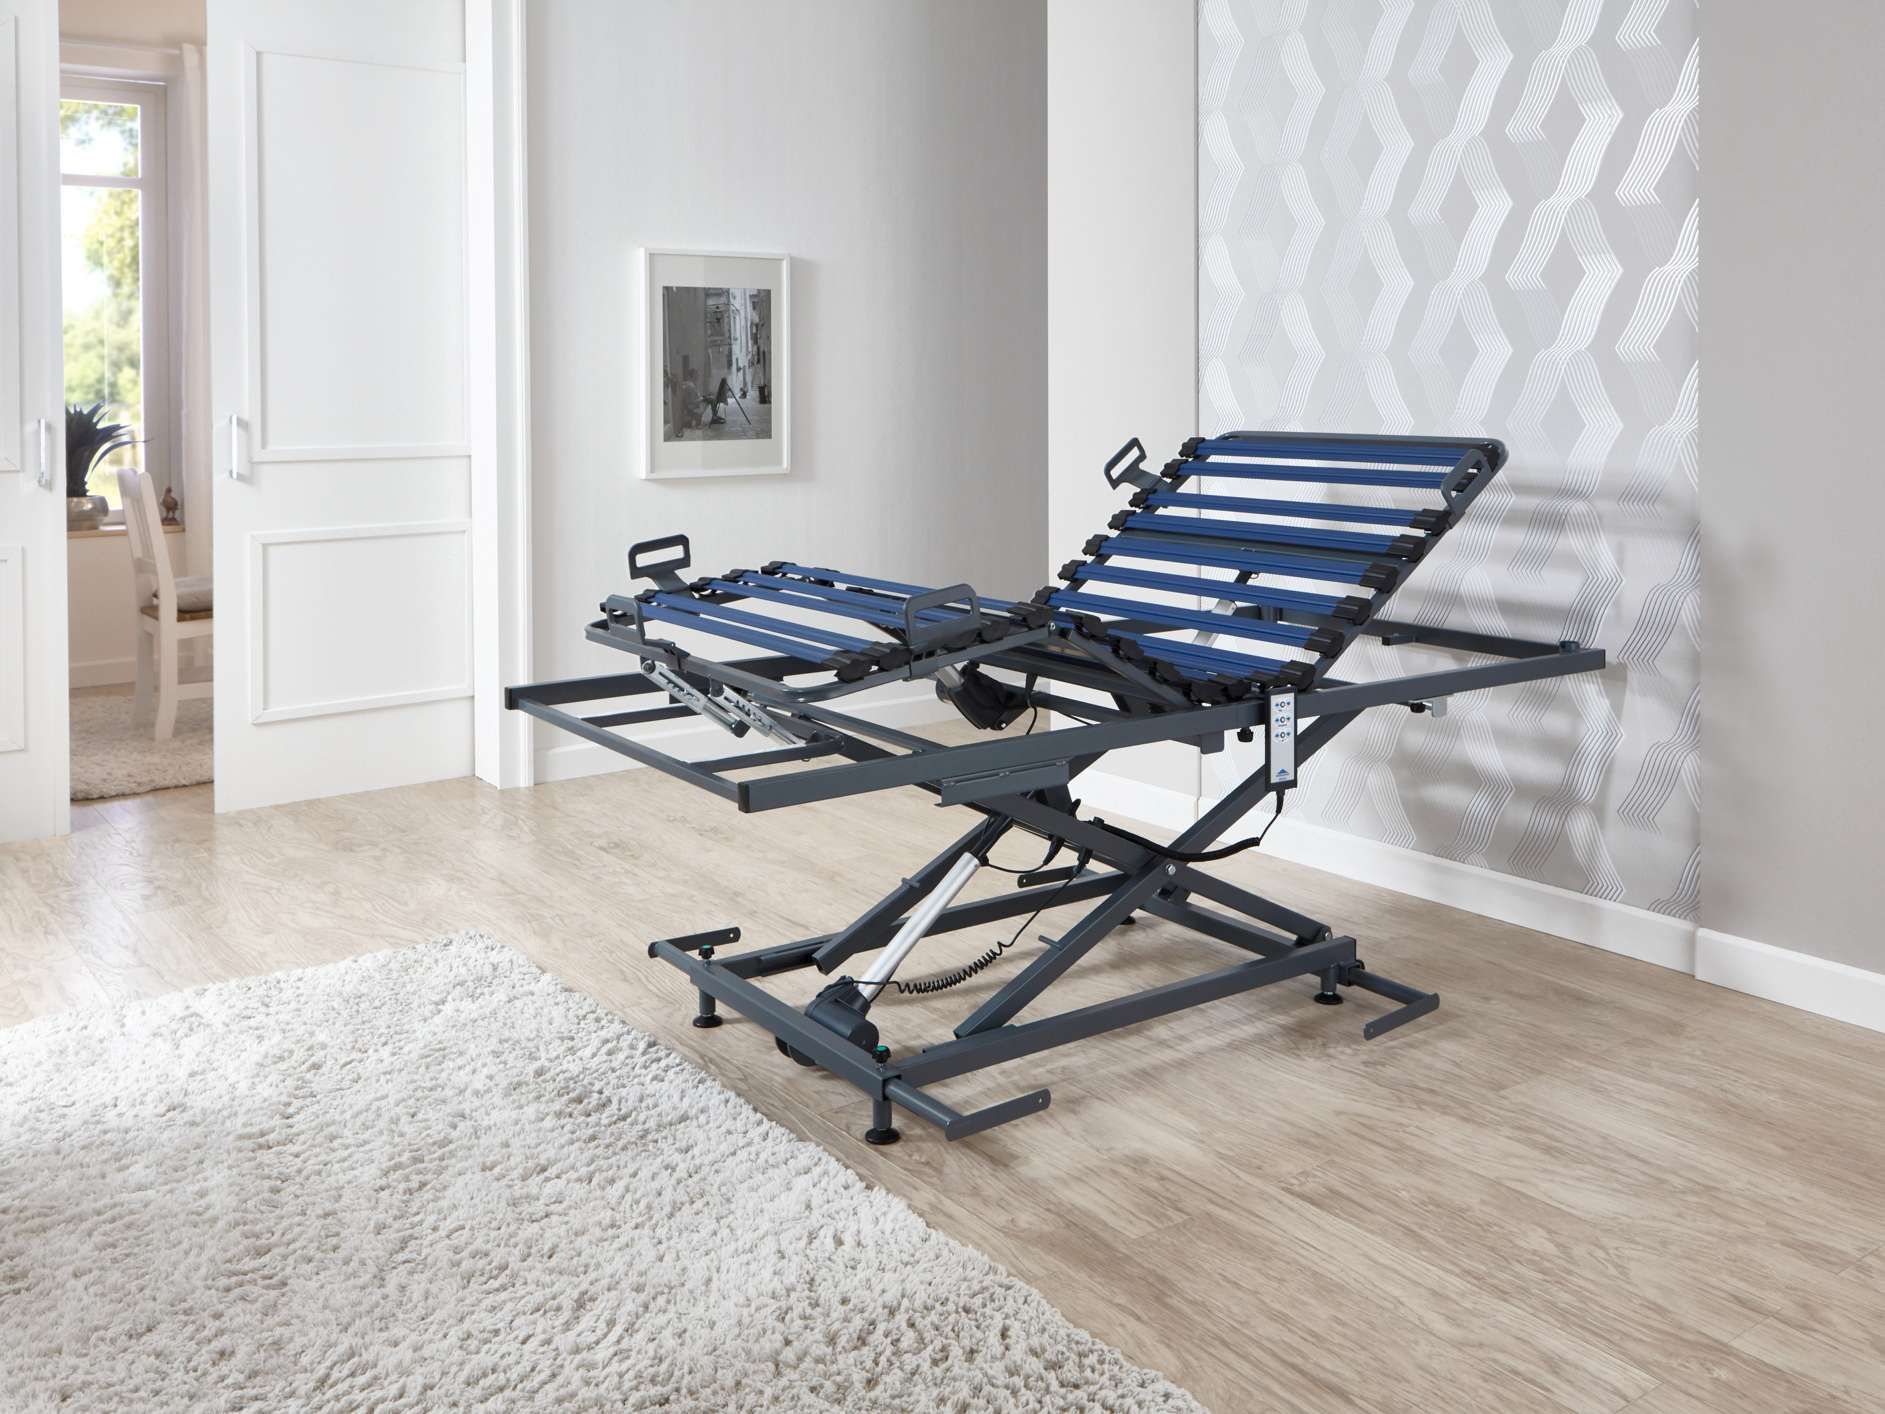 The Lindeo comfort frame from Stiegelmeyer